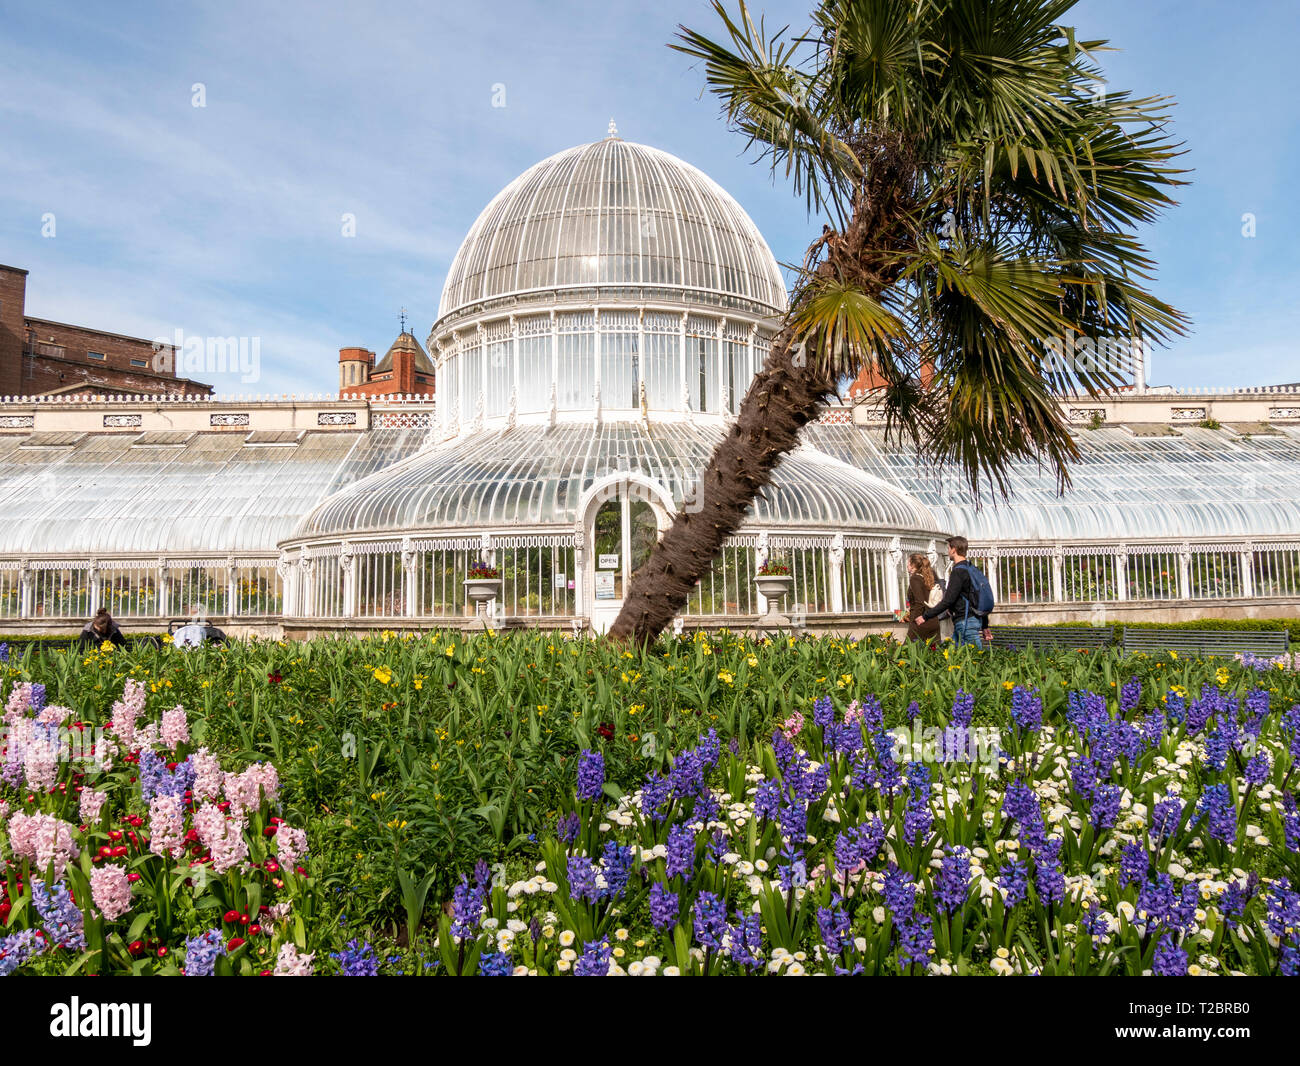 Belfast, Northern Ireland, UK - March, 23 2019: Botanic Gardens showing entrance to The Palm House Stock Photo